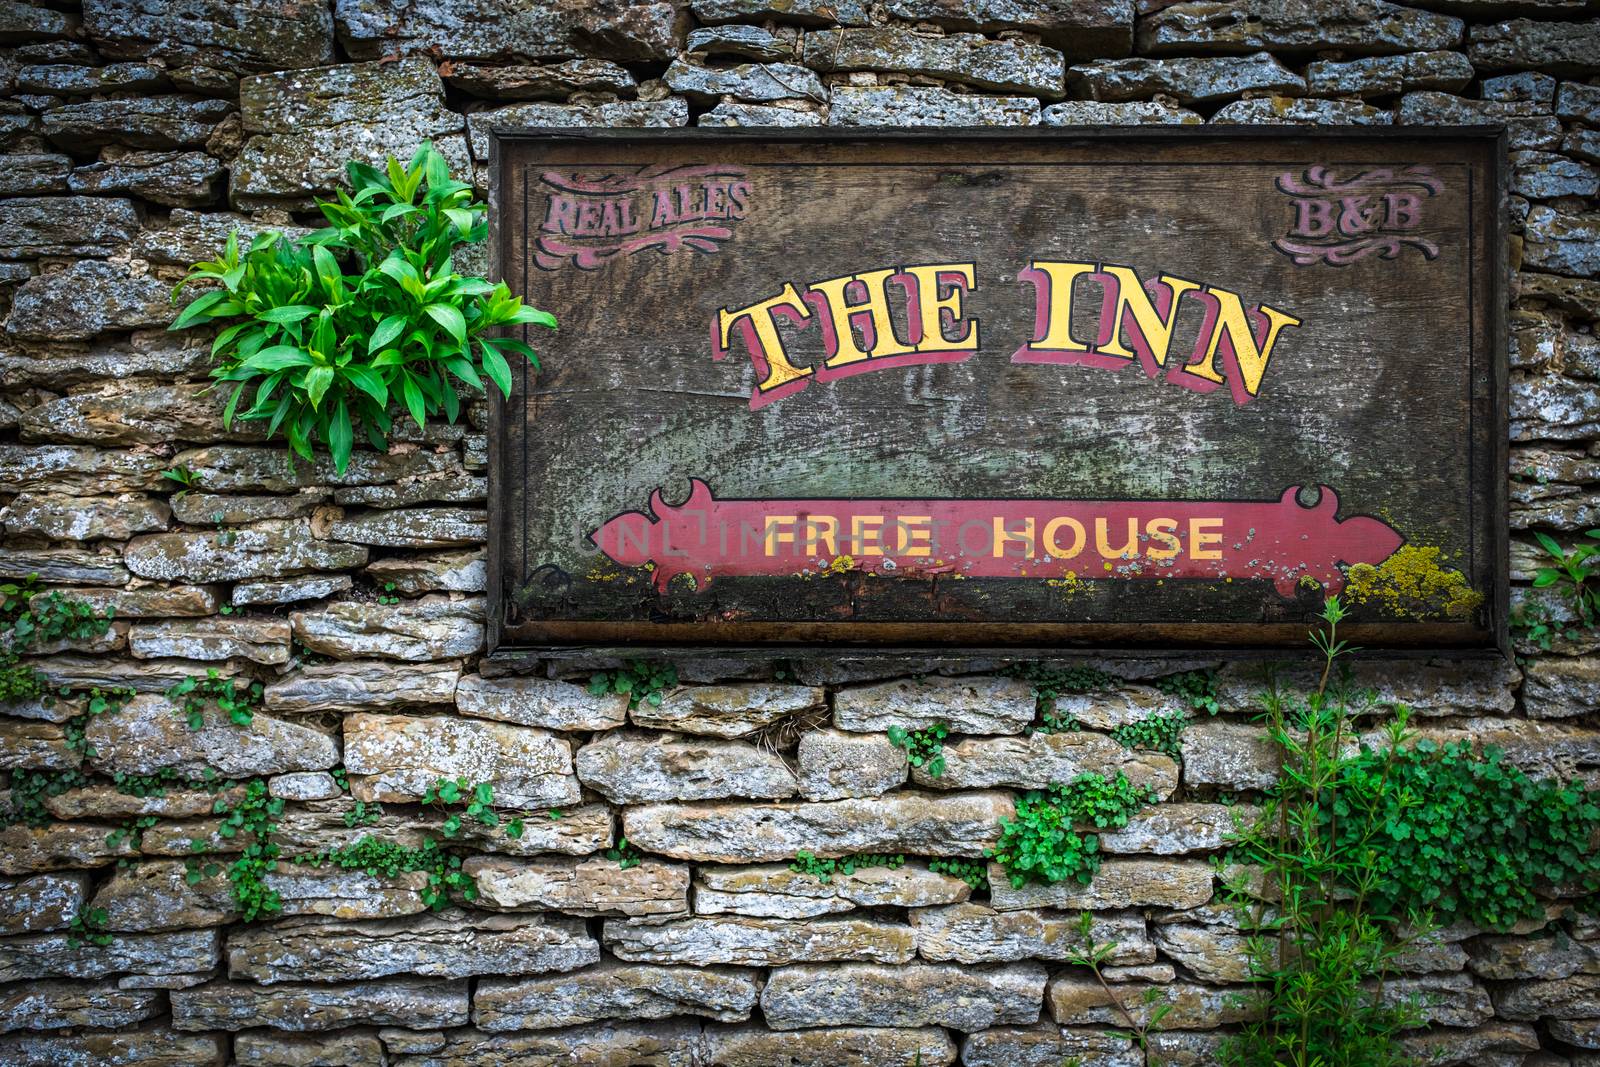 An Ancient Old Sign For A Typical English Inn And Pub And Bed And Breakfast